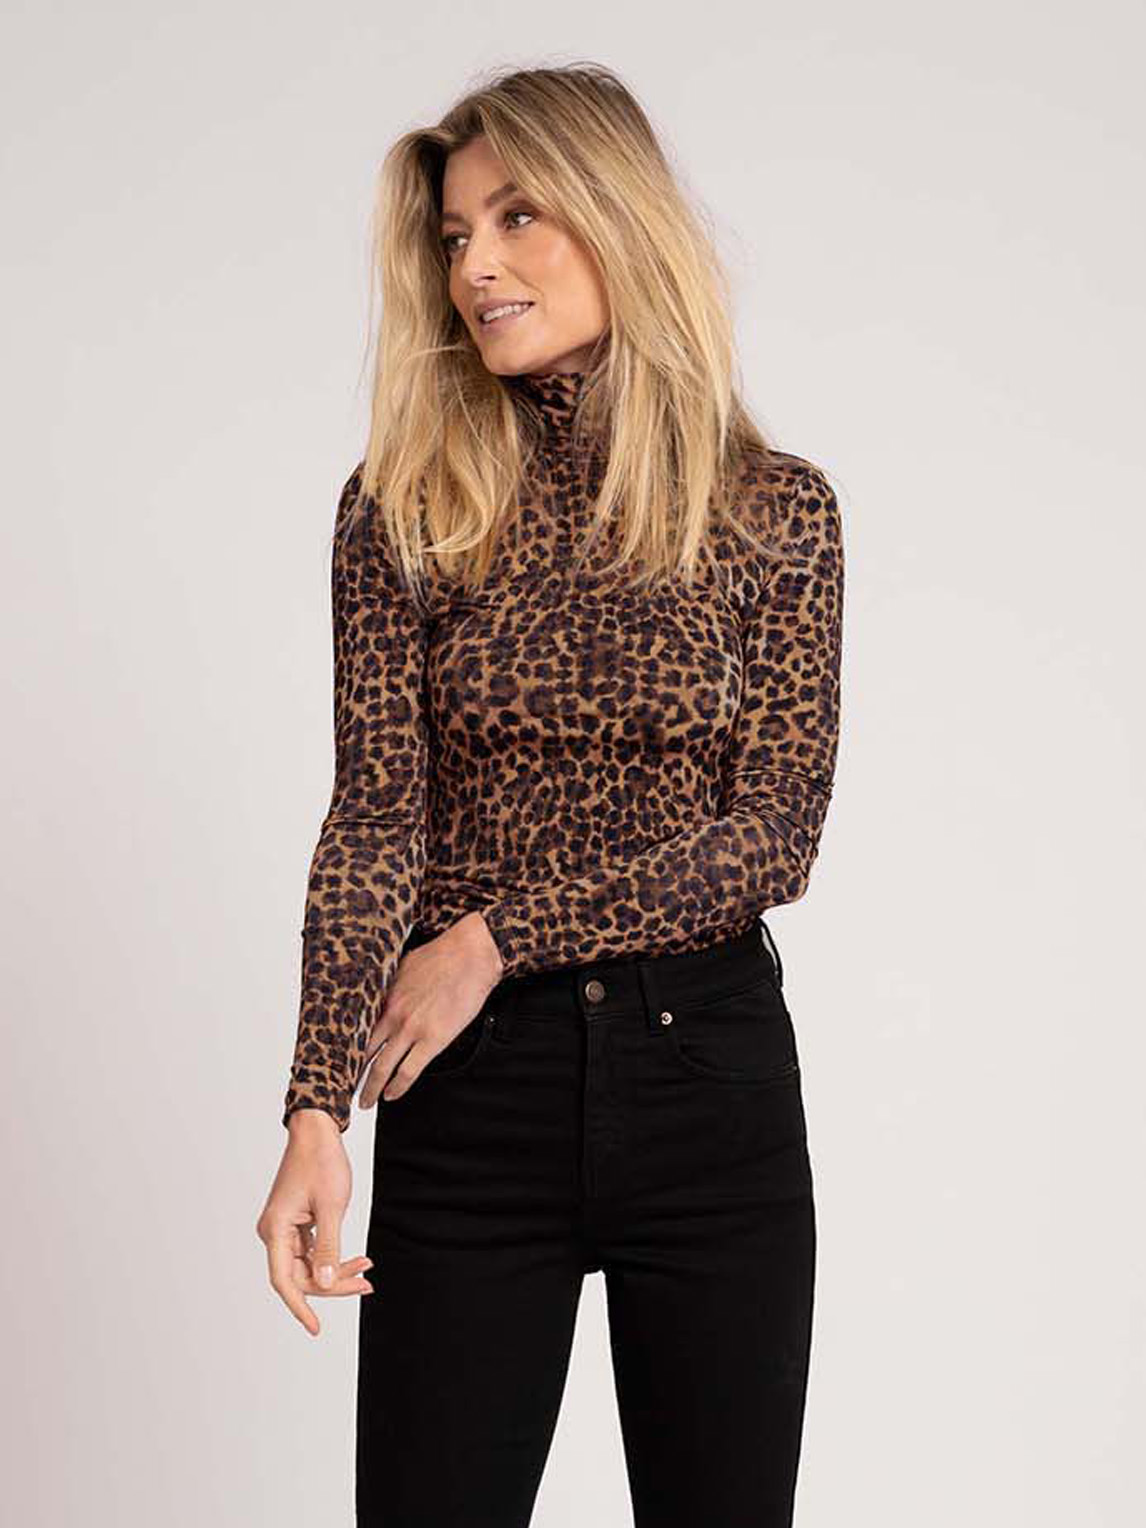  Fitted Leopard print top with turtleneck  